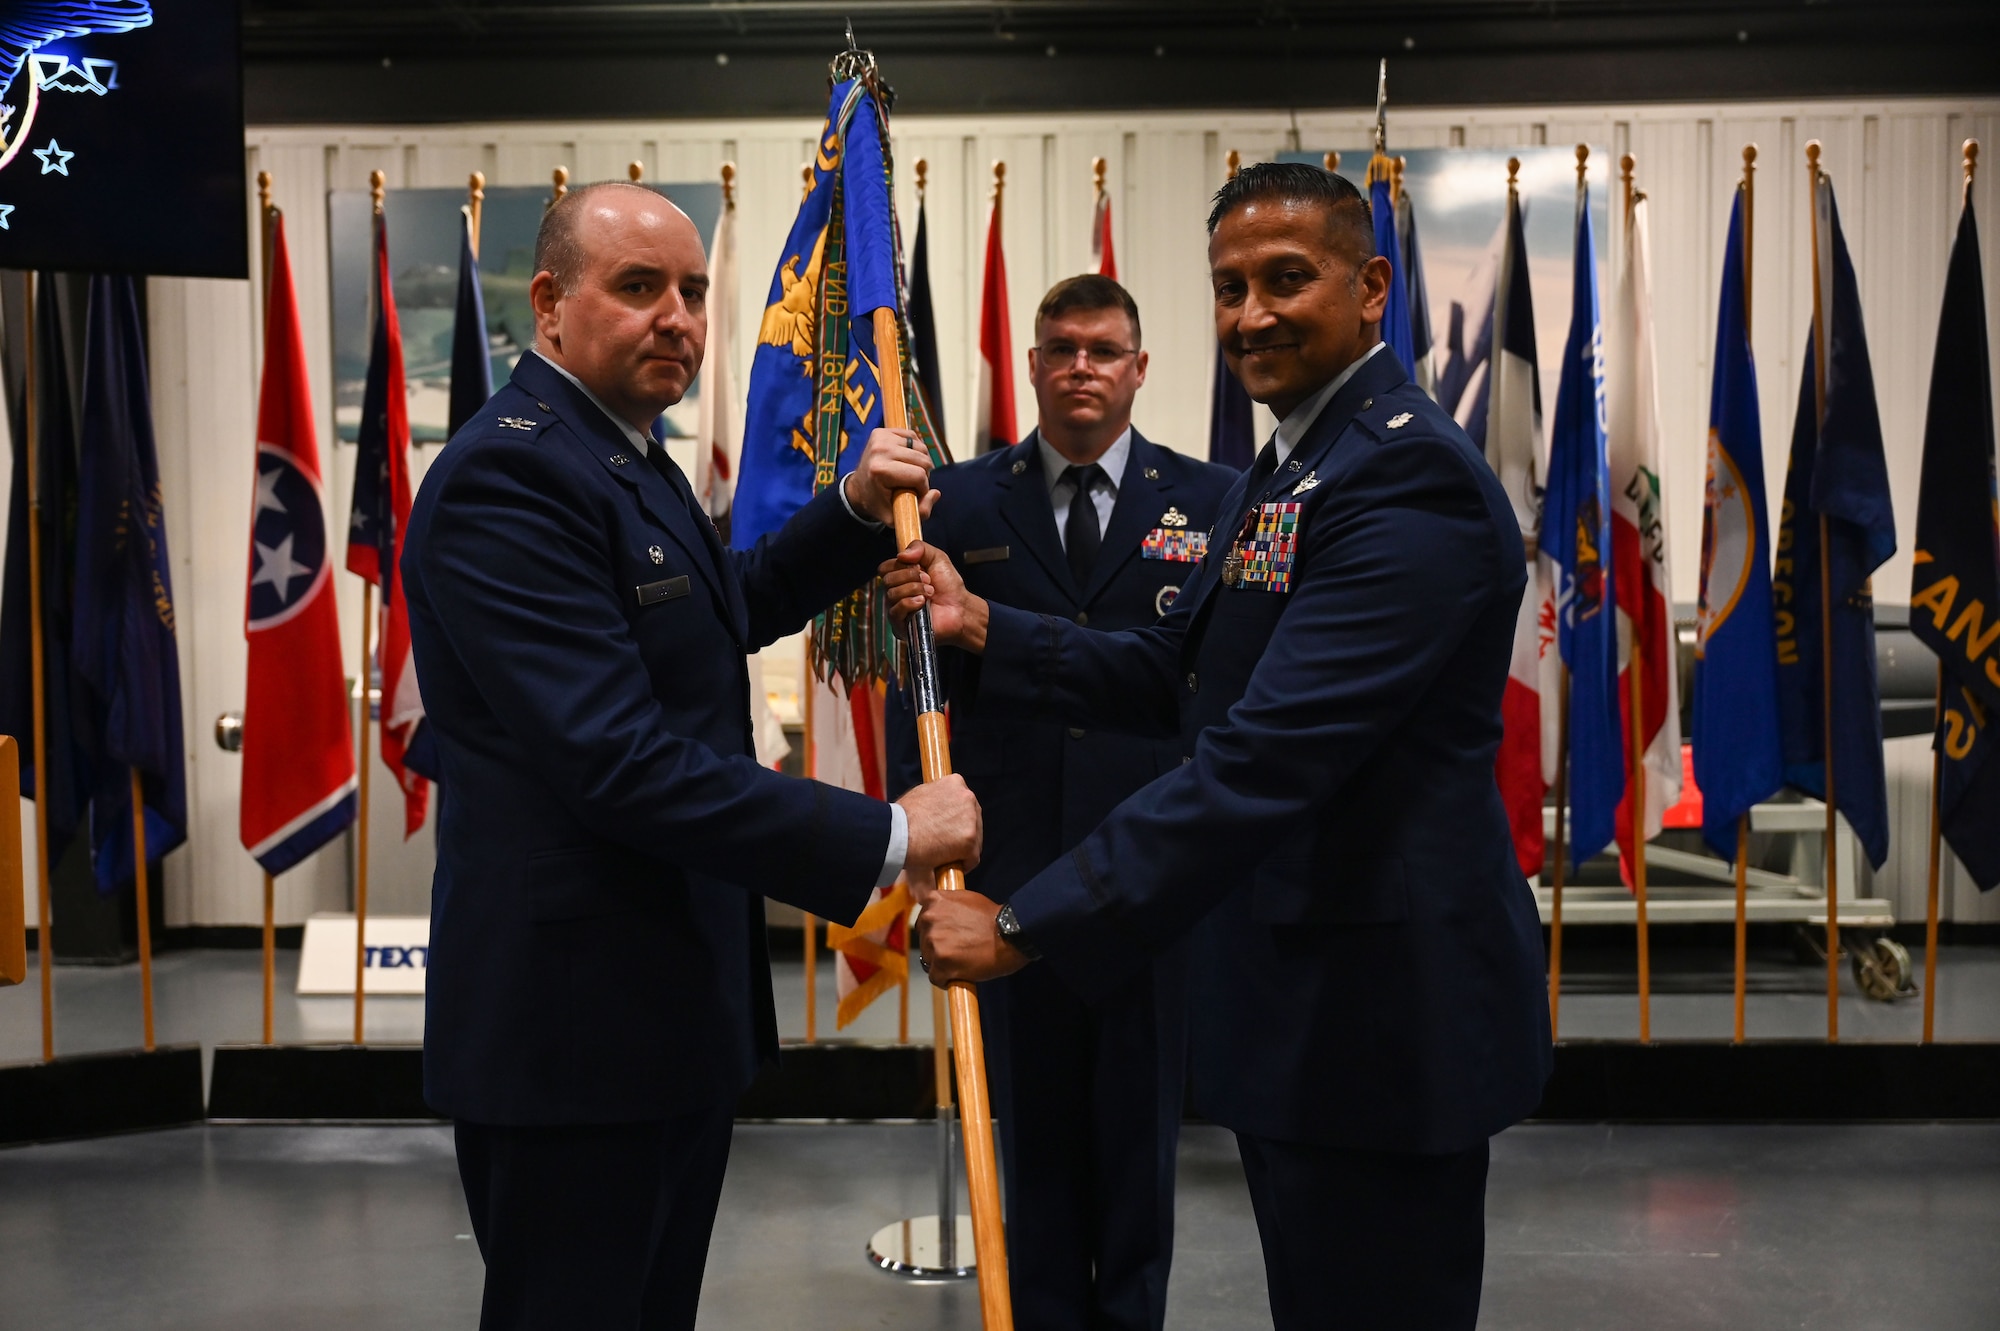 U.S. Air Force Lt. Col. Ajay K. Giri, 16th Electronic Warfare Squadron (EWS) outgoing commander, right, passes the guidon to U.S. Air Force Col. Robert P. Cocke, 350th Spectrum Warfare Group commander, left, at Eglin Air Force Base, June 6, 2023. The mission of the 16th EWS is to develop, test, validate, and field electromagnetic warfare capabilities for the warfighter. These capabilities enhance the survivability of our combat air forces in contested environments. (U.S. Air Force photo by Staff Sgt. Ericka A. Woolever)